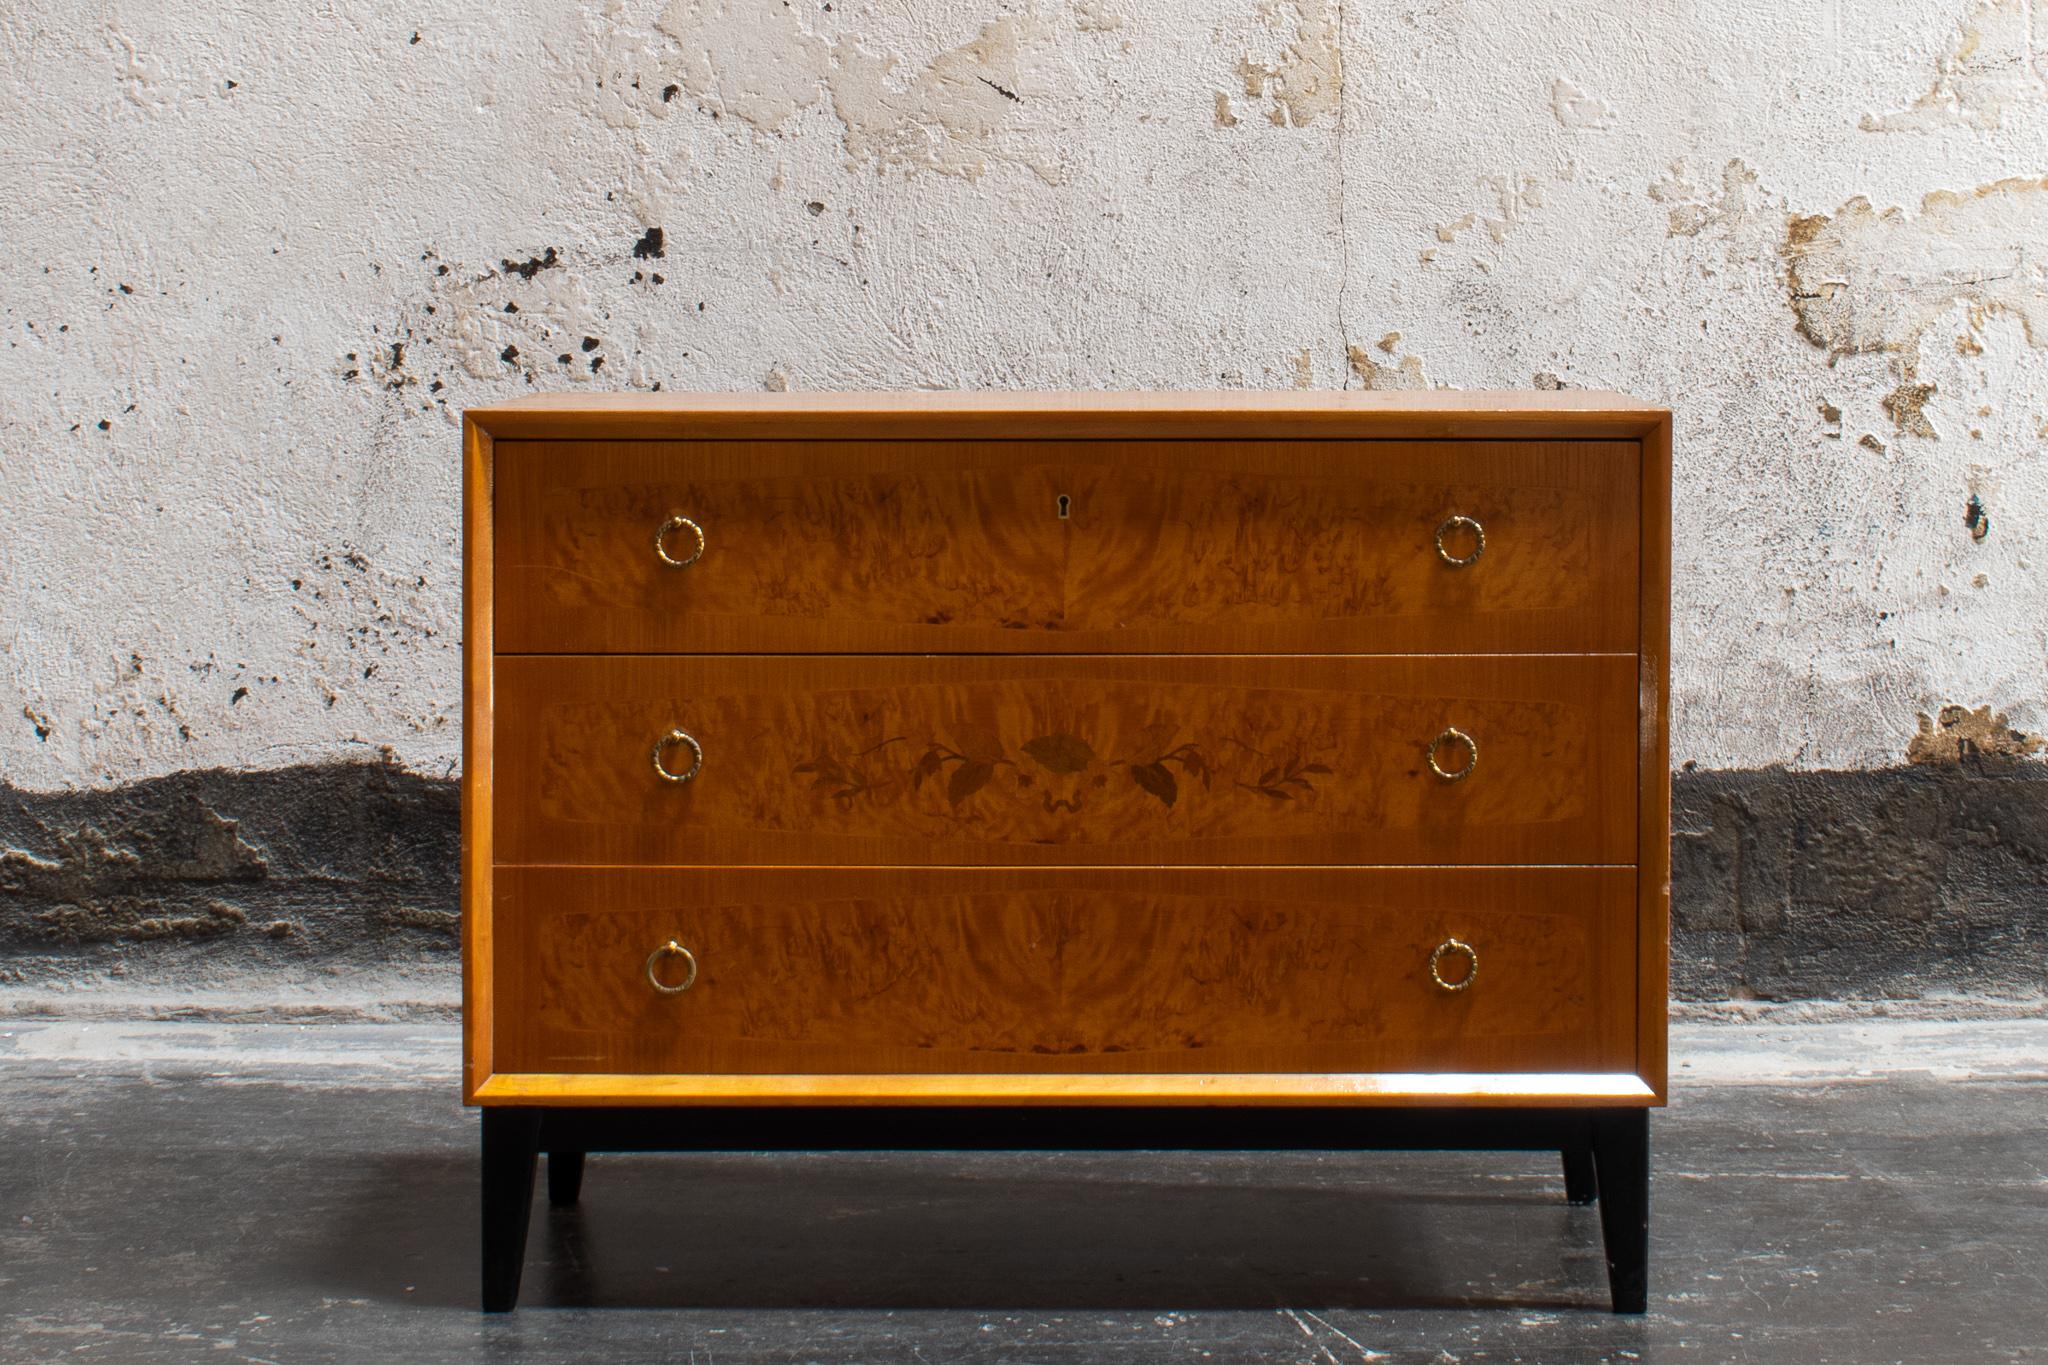 Art Deco chest of drawers in golden flame birch, featuring an ebonized base and intarsia inlay in a floral motif. Three drawers with brass pulls.